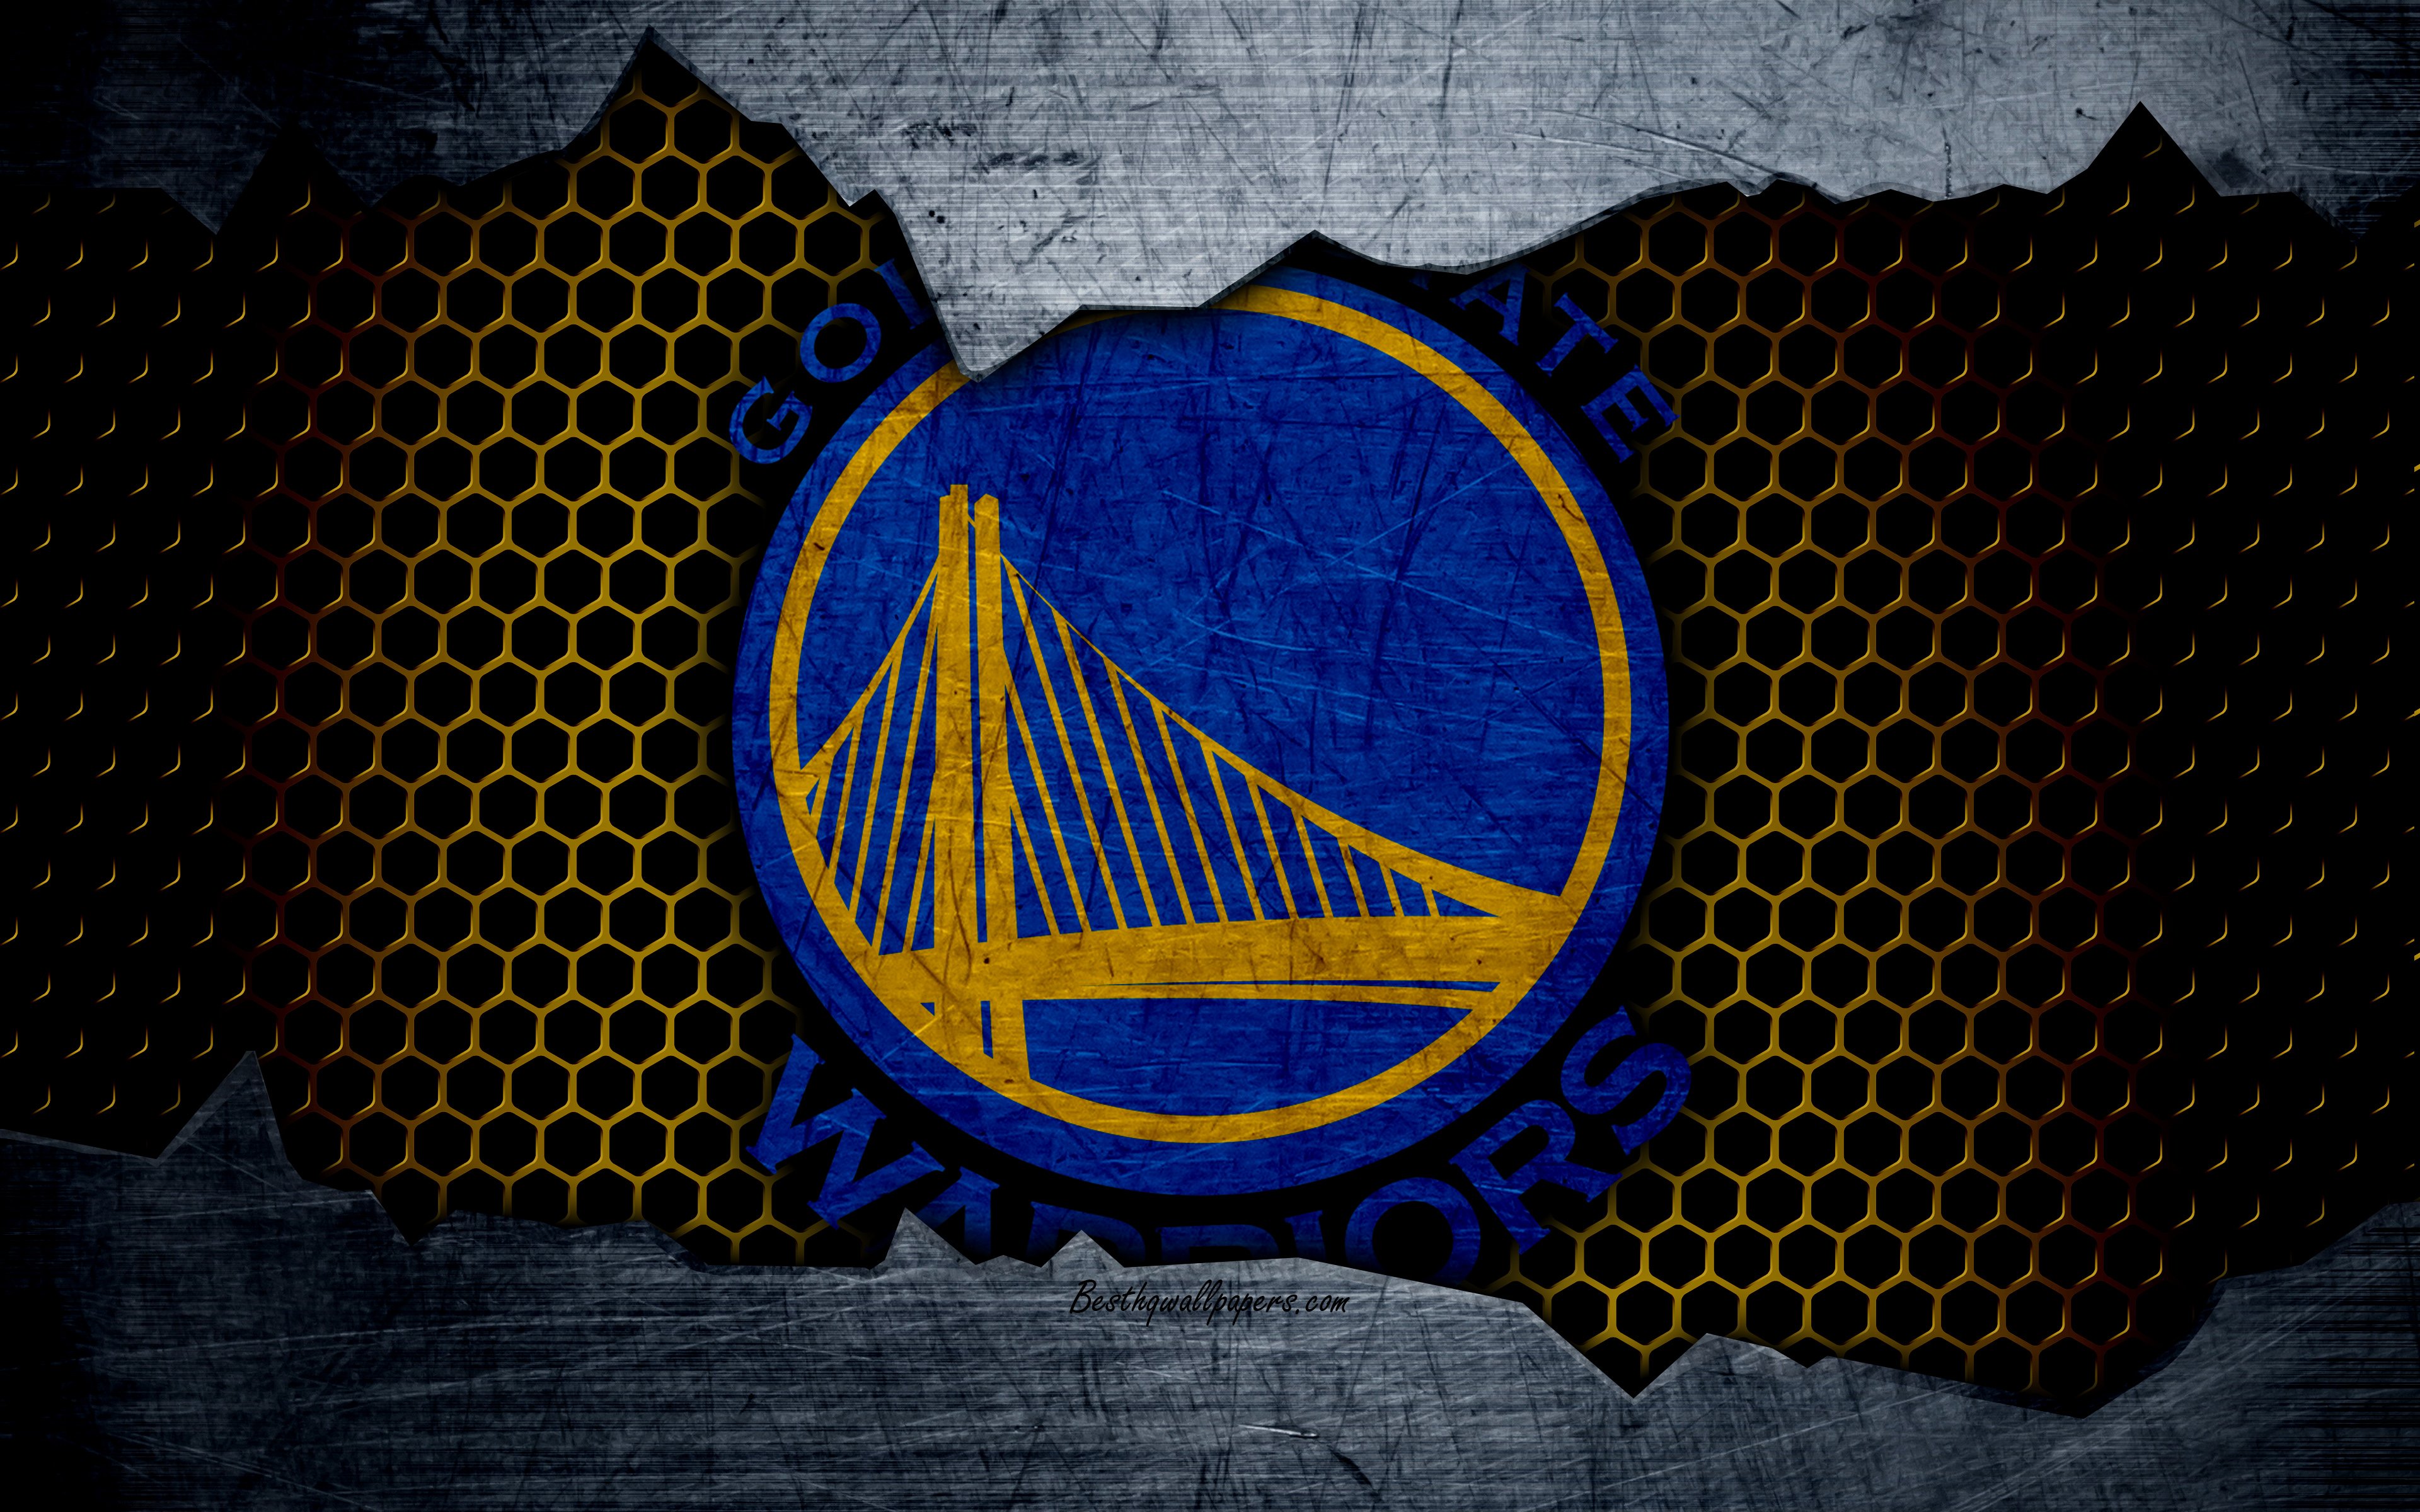 Download wallpaper Golden State Warriors, 4k, logo, NBA, basketball, Western Conference, USA, grunge, metal texture, Northwest Division for desktop with resolution 3840x2400. High Quality HD picture wallpaper